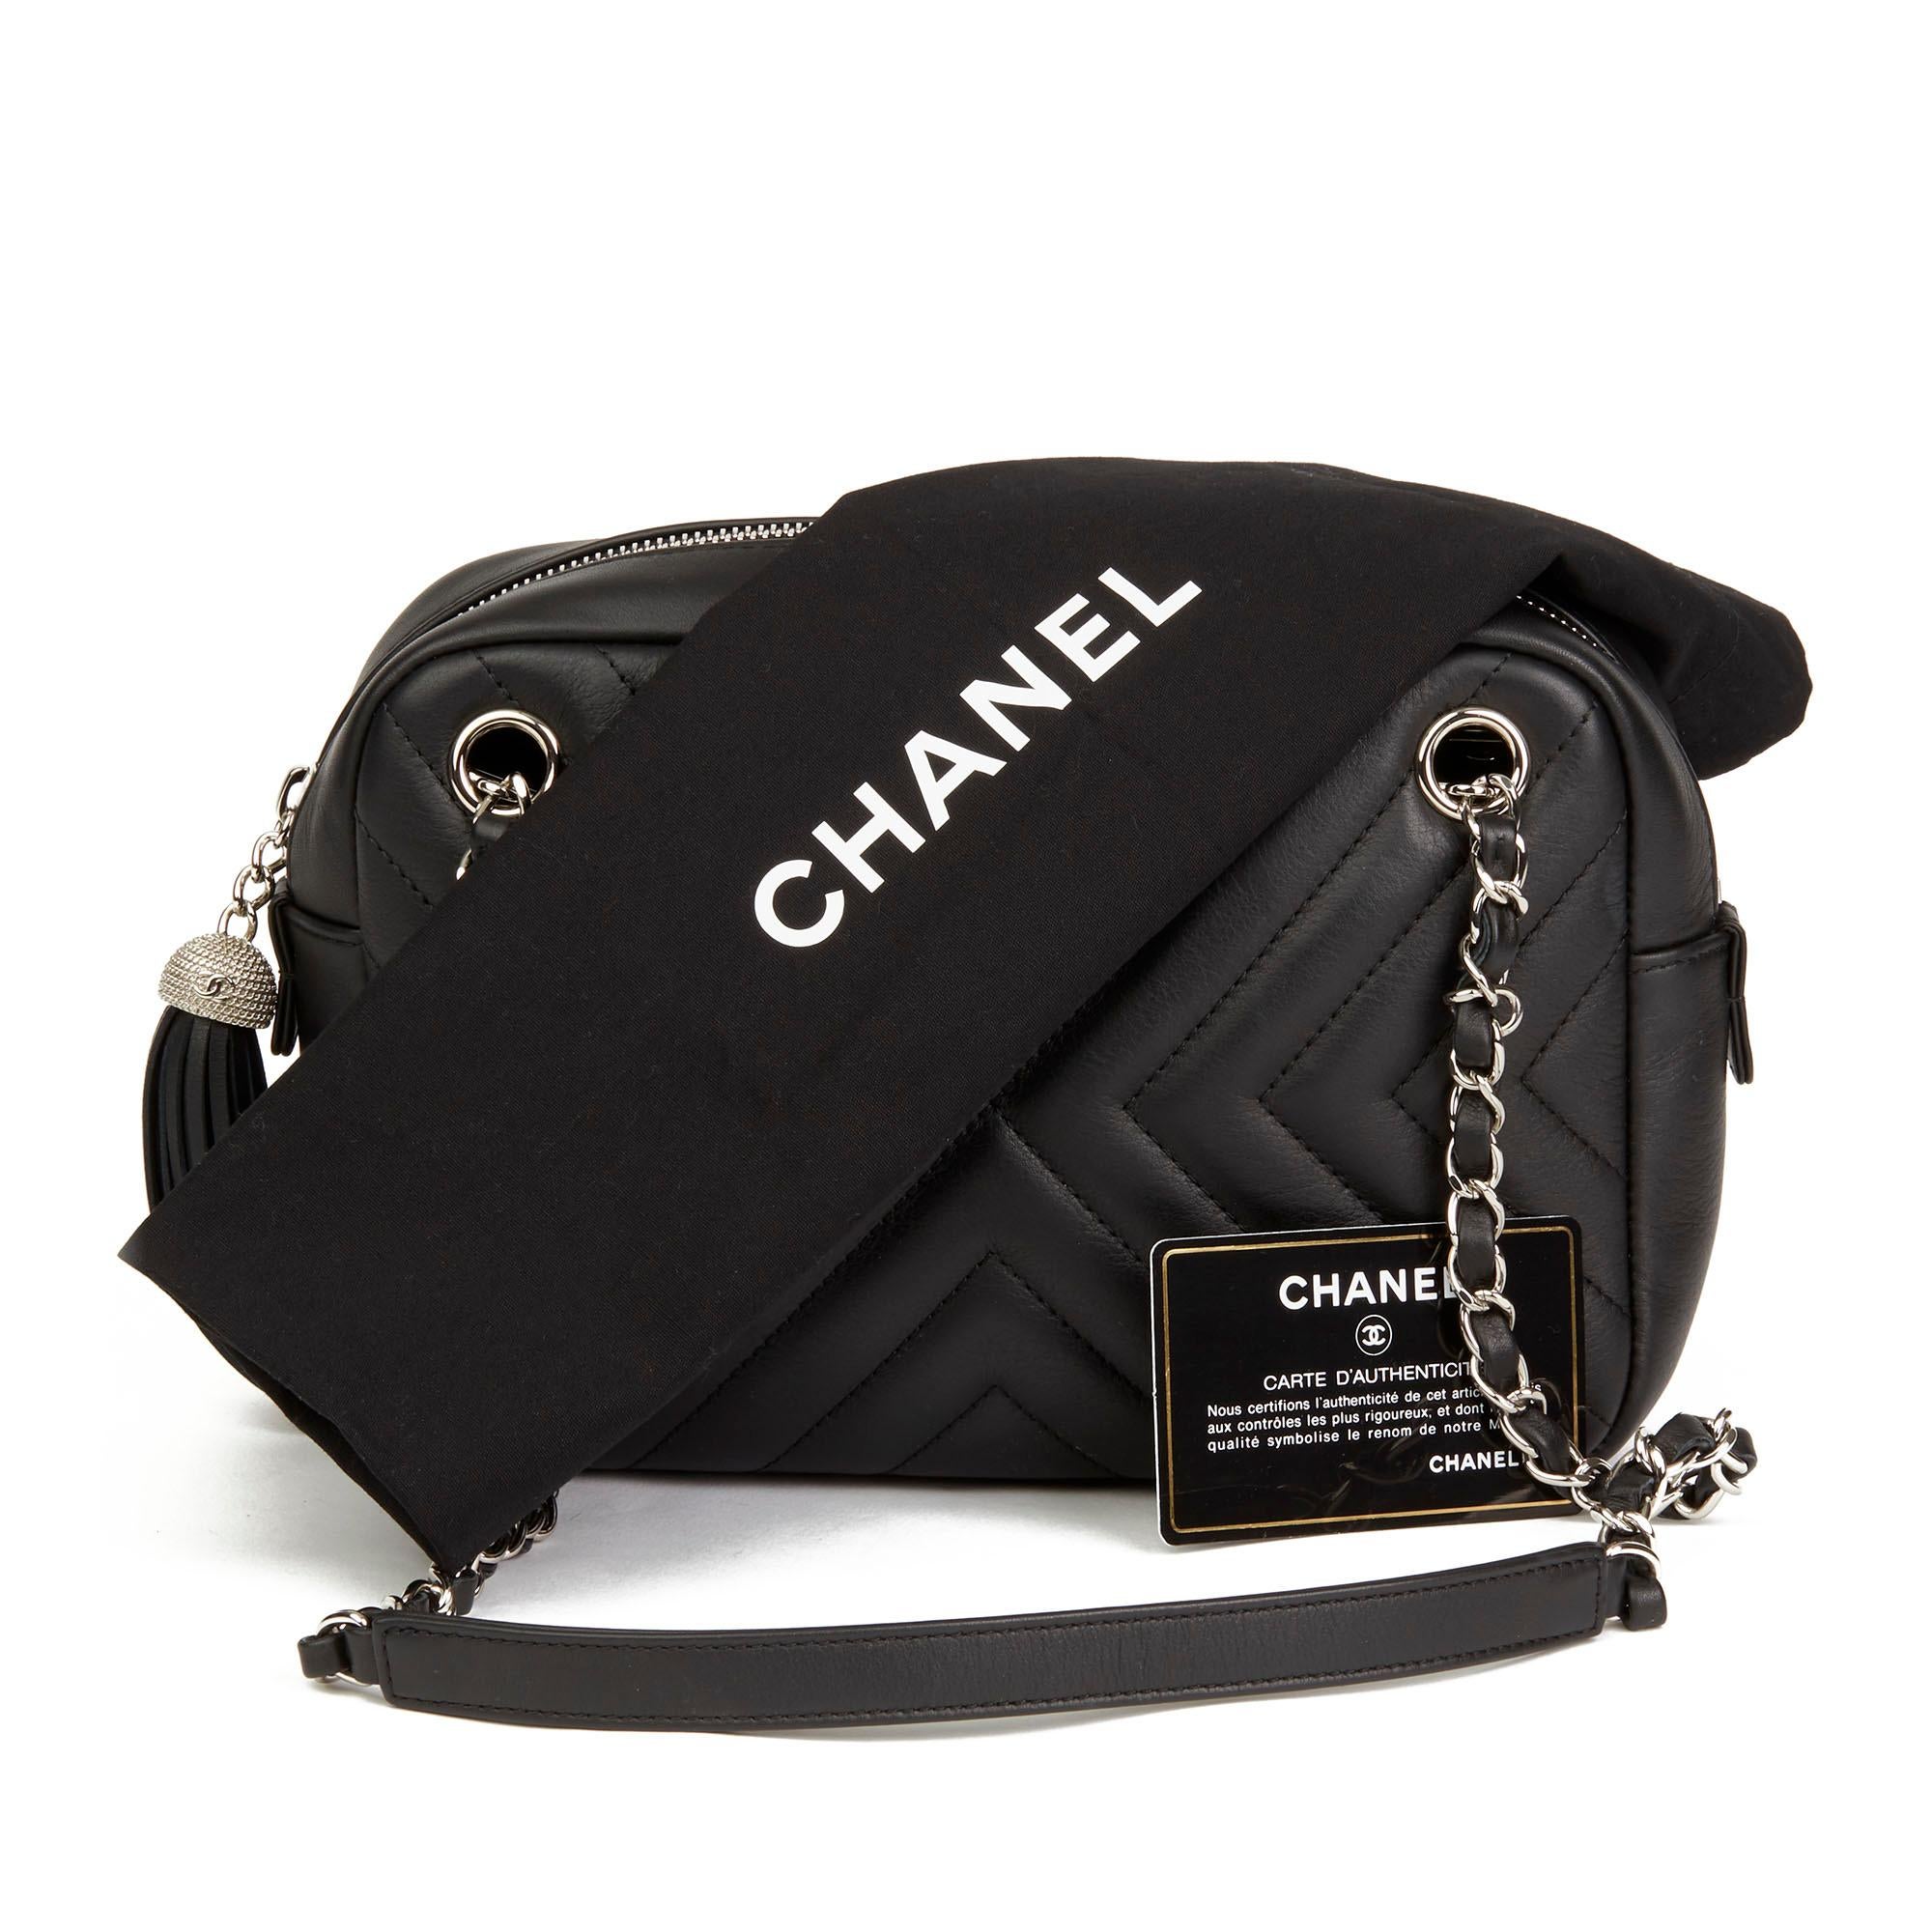 2018 Chanel Black Chevron Quilted Calfskin Leather Classic Fringe Camera Bag 4